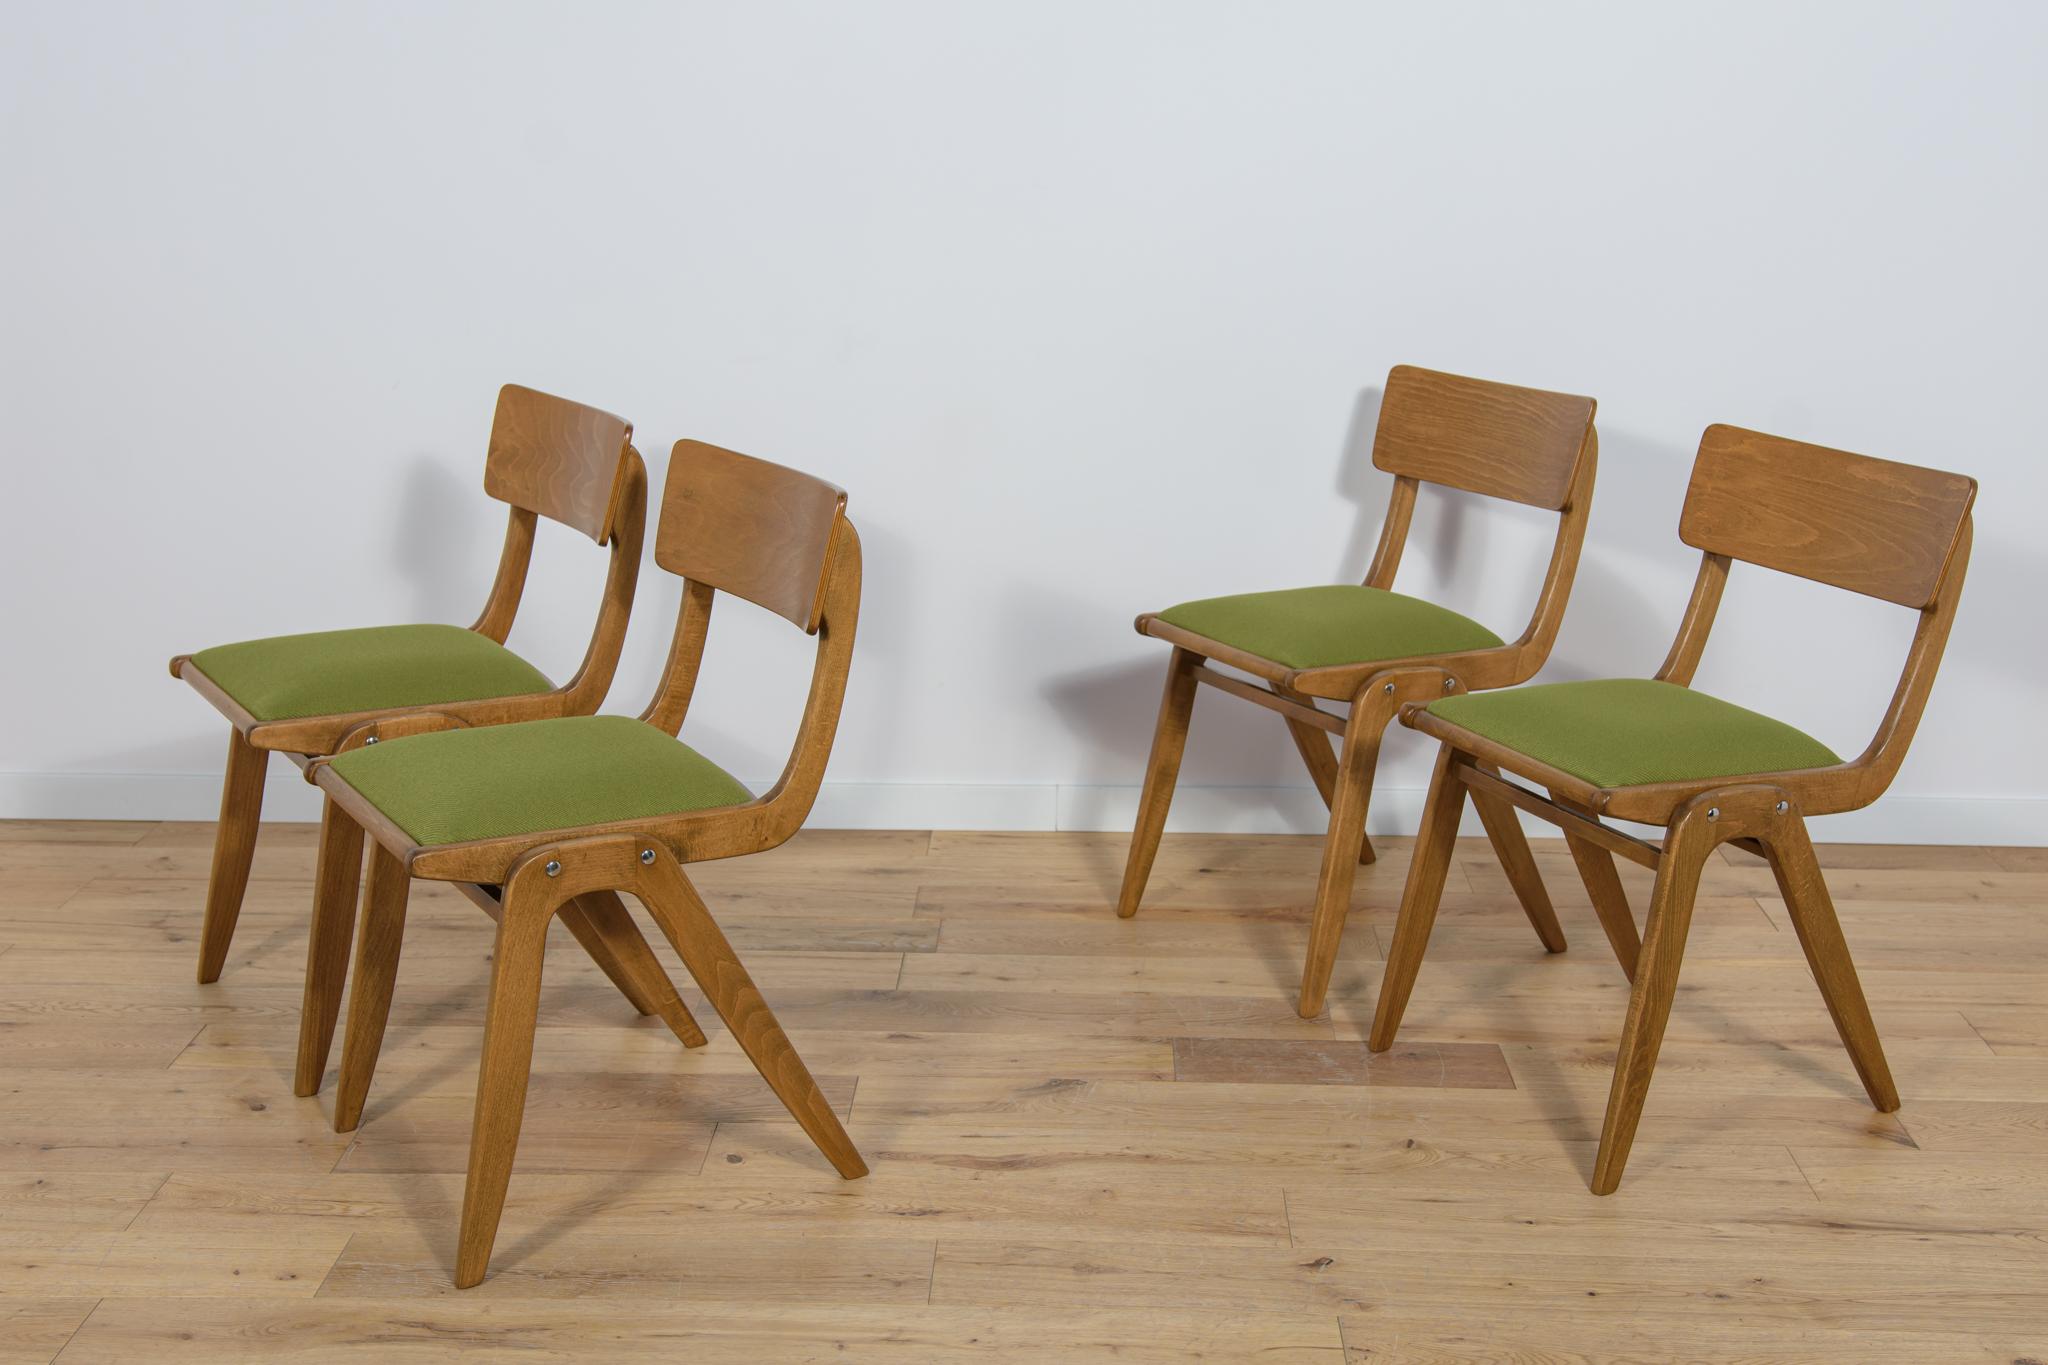 Woodwork Boomerang Dining Chairs Typ 229xB from Goscinski Furniture Factory, 1960s. For Sale